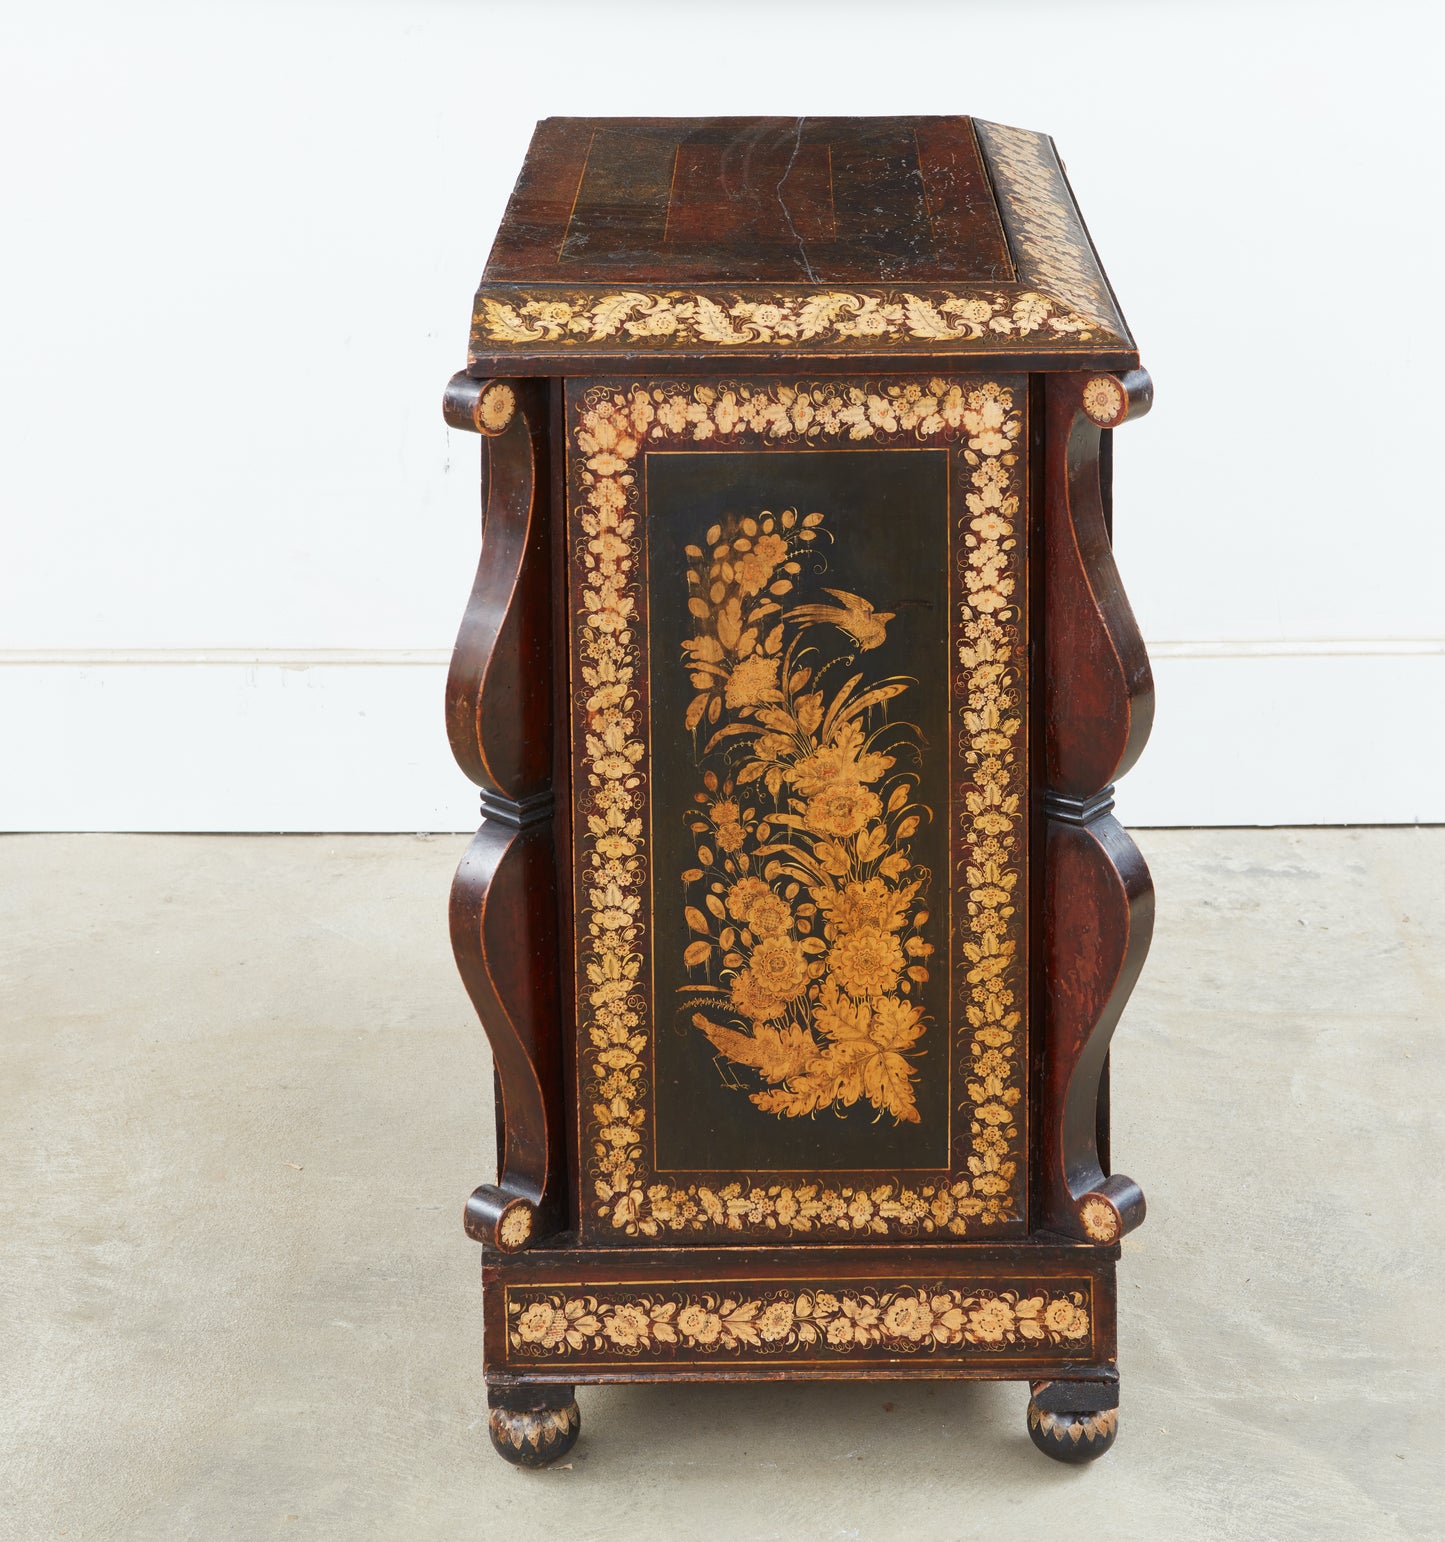 A VERY FINE REGENCY PARCEL GILT AND POLYCHROME JAPANNED AND PENWORK CABINET c. 1820